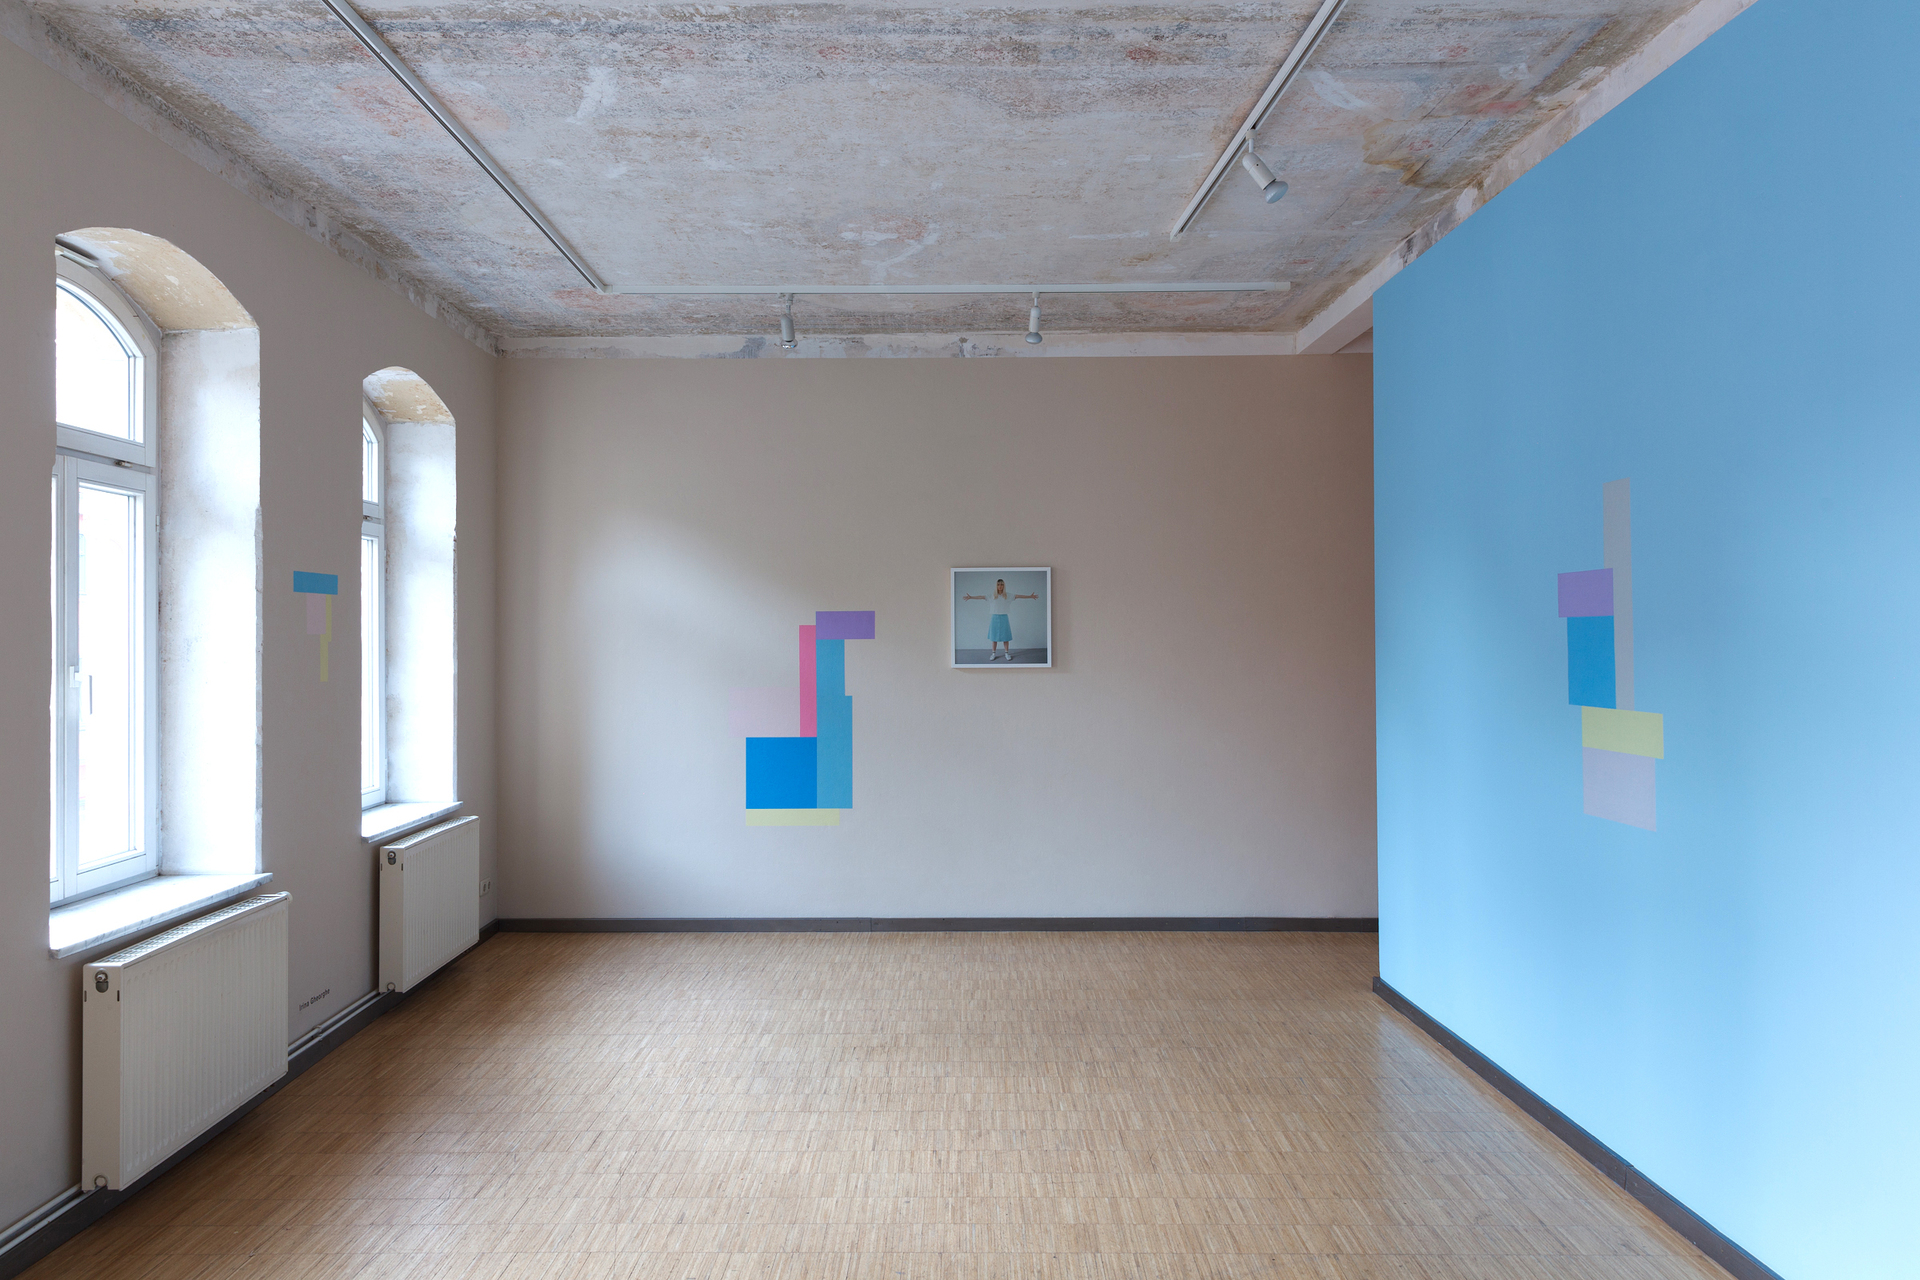 Exhibition view, Irina Gheorghe, 'Methods for the Study of What Is Not There', mixed media installation (tape on wall, photography, paint, dimensions variable)